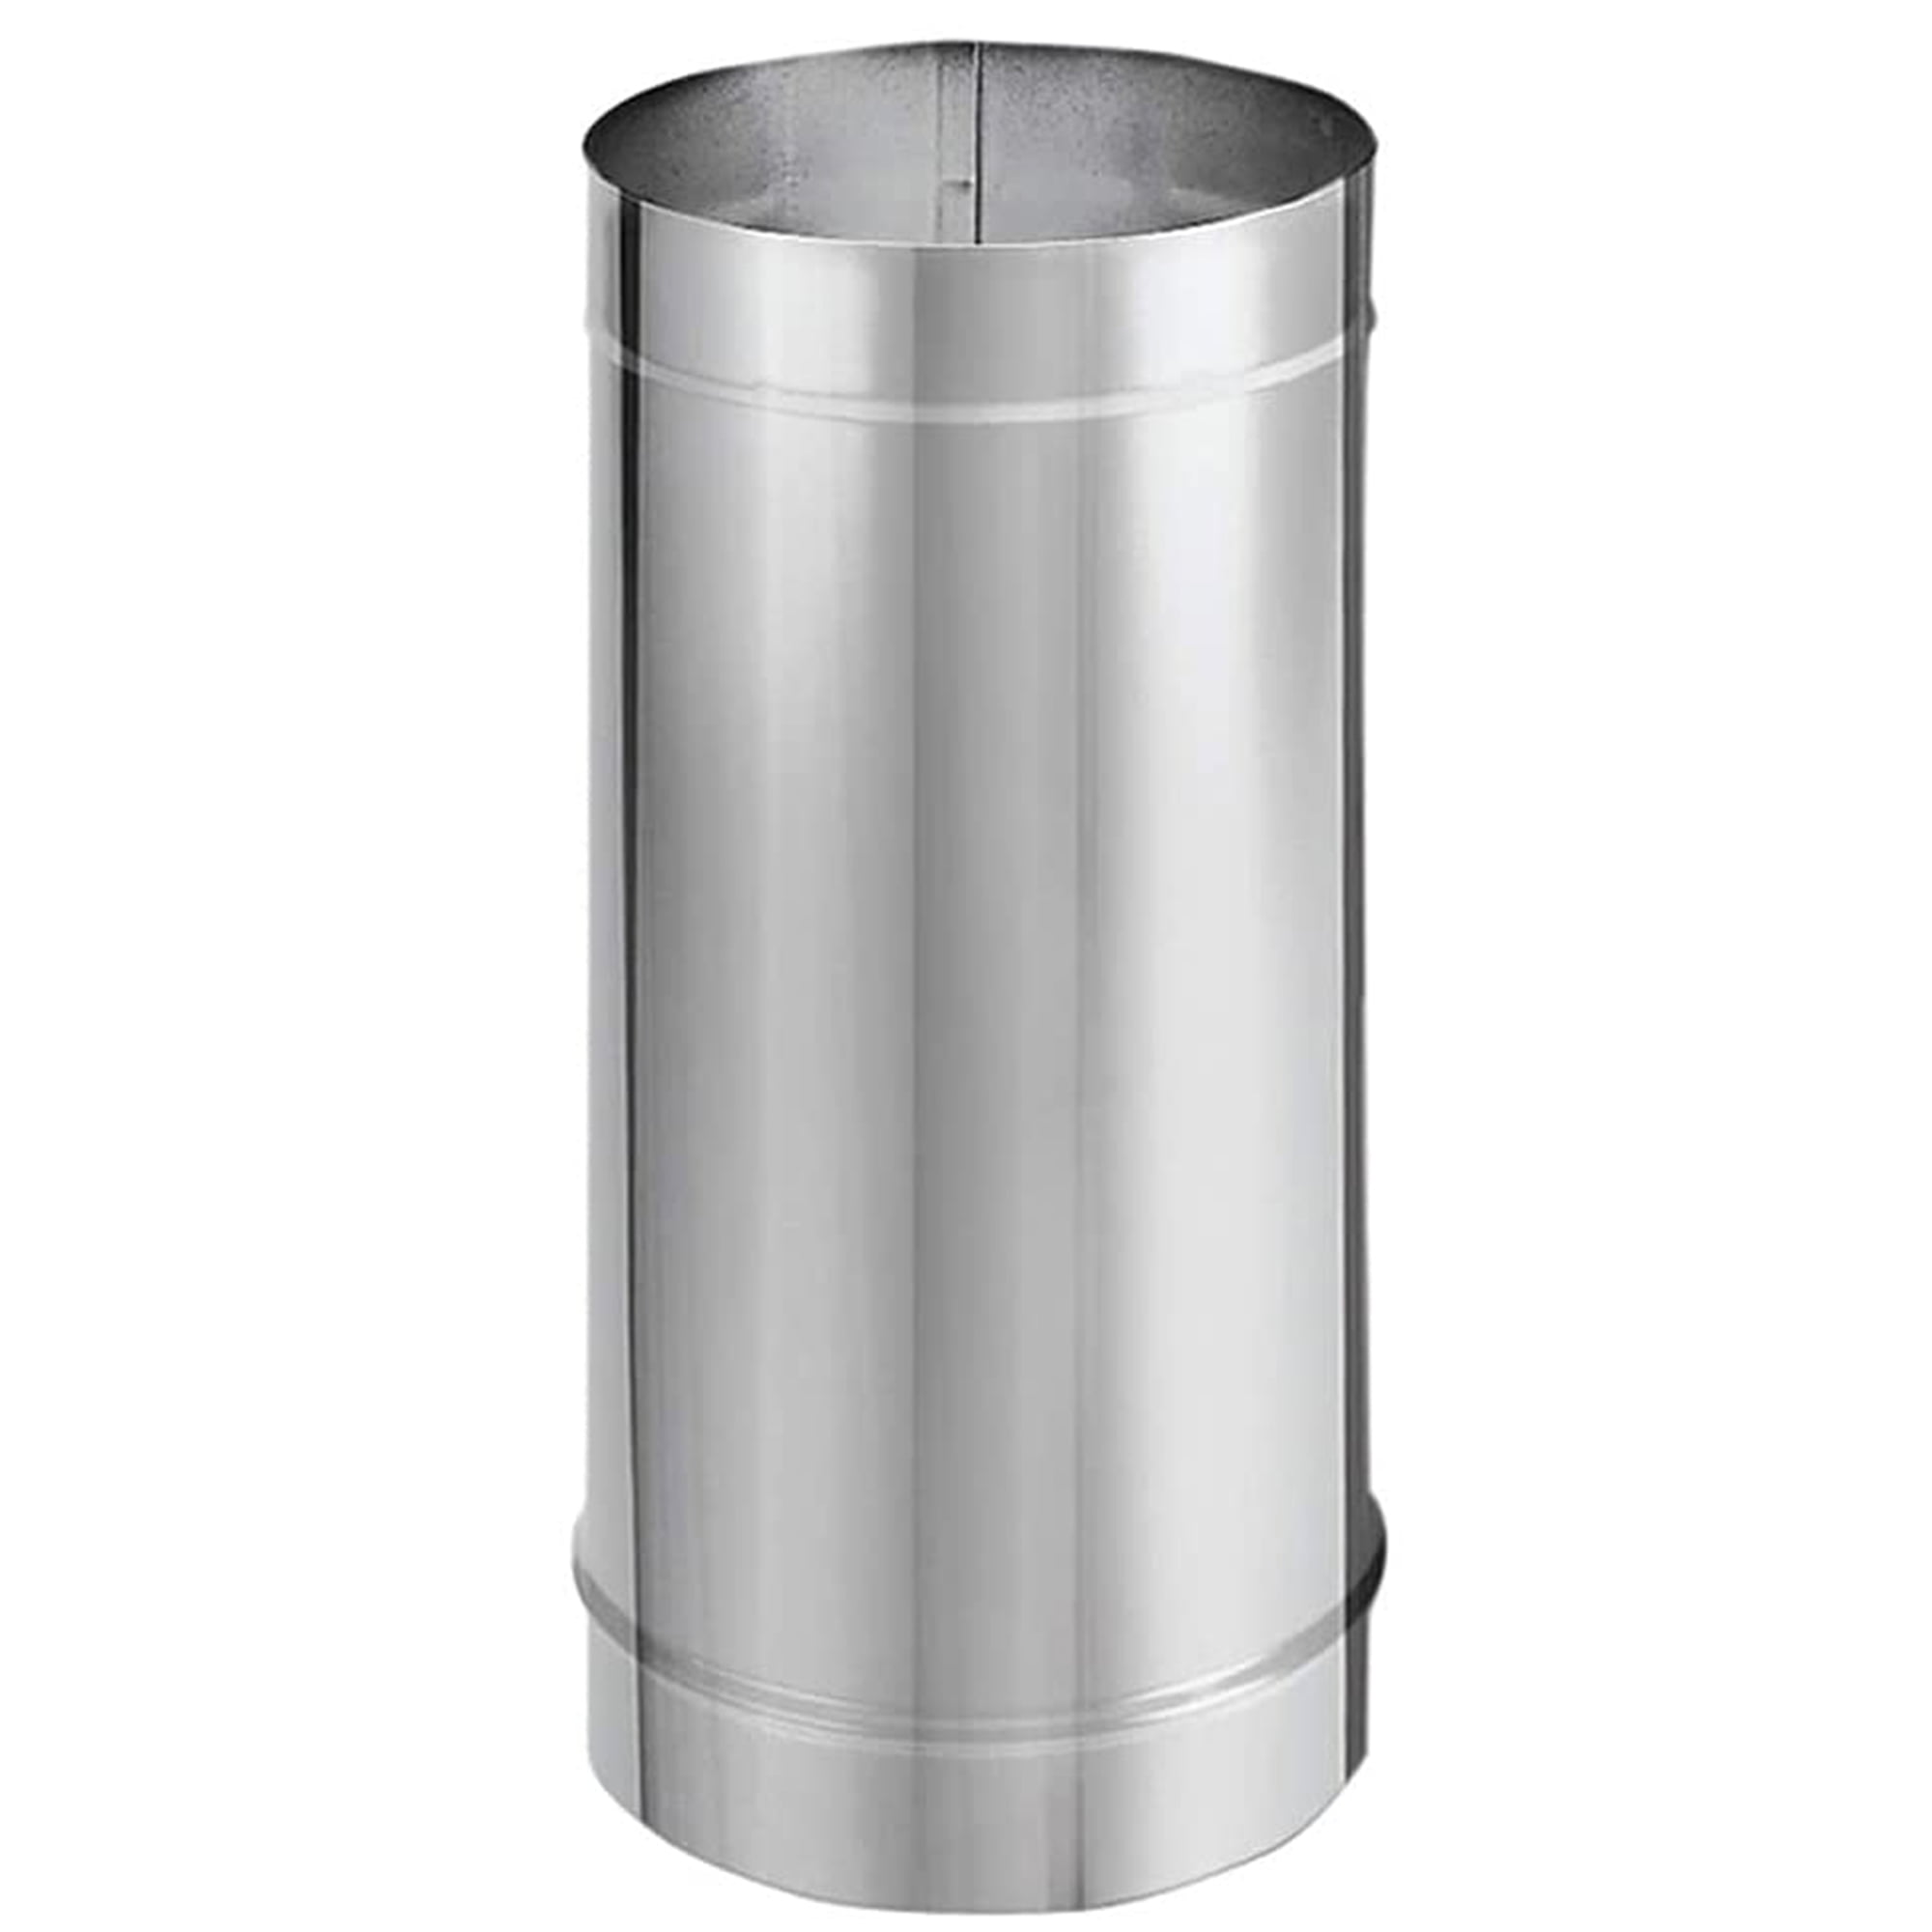 DuraVent DuraTech 10 Stainless Steel Chimney Pipe & Parts